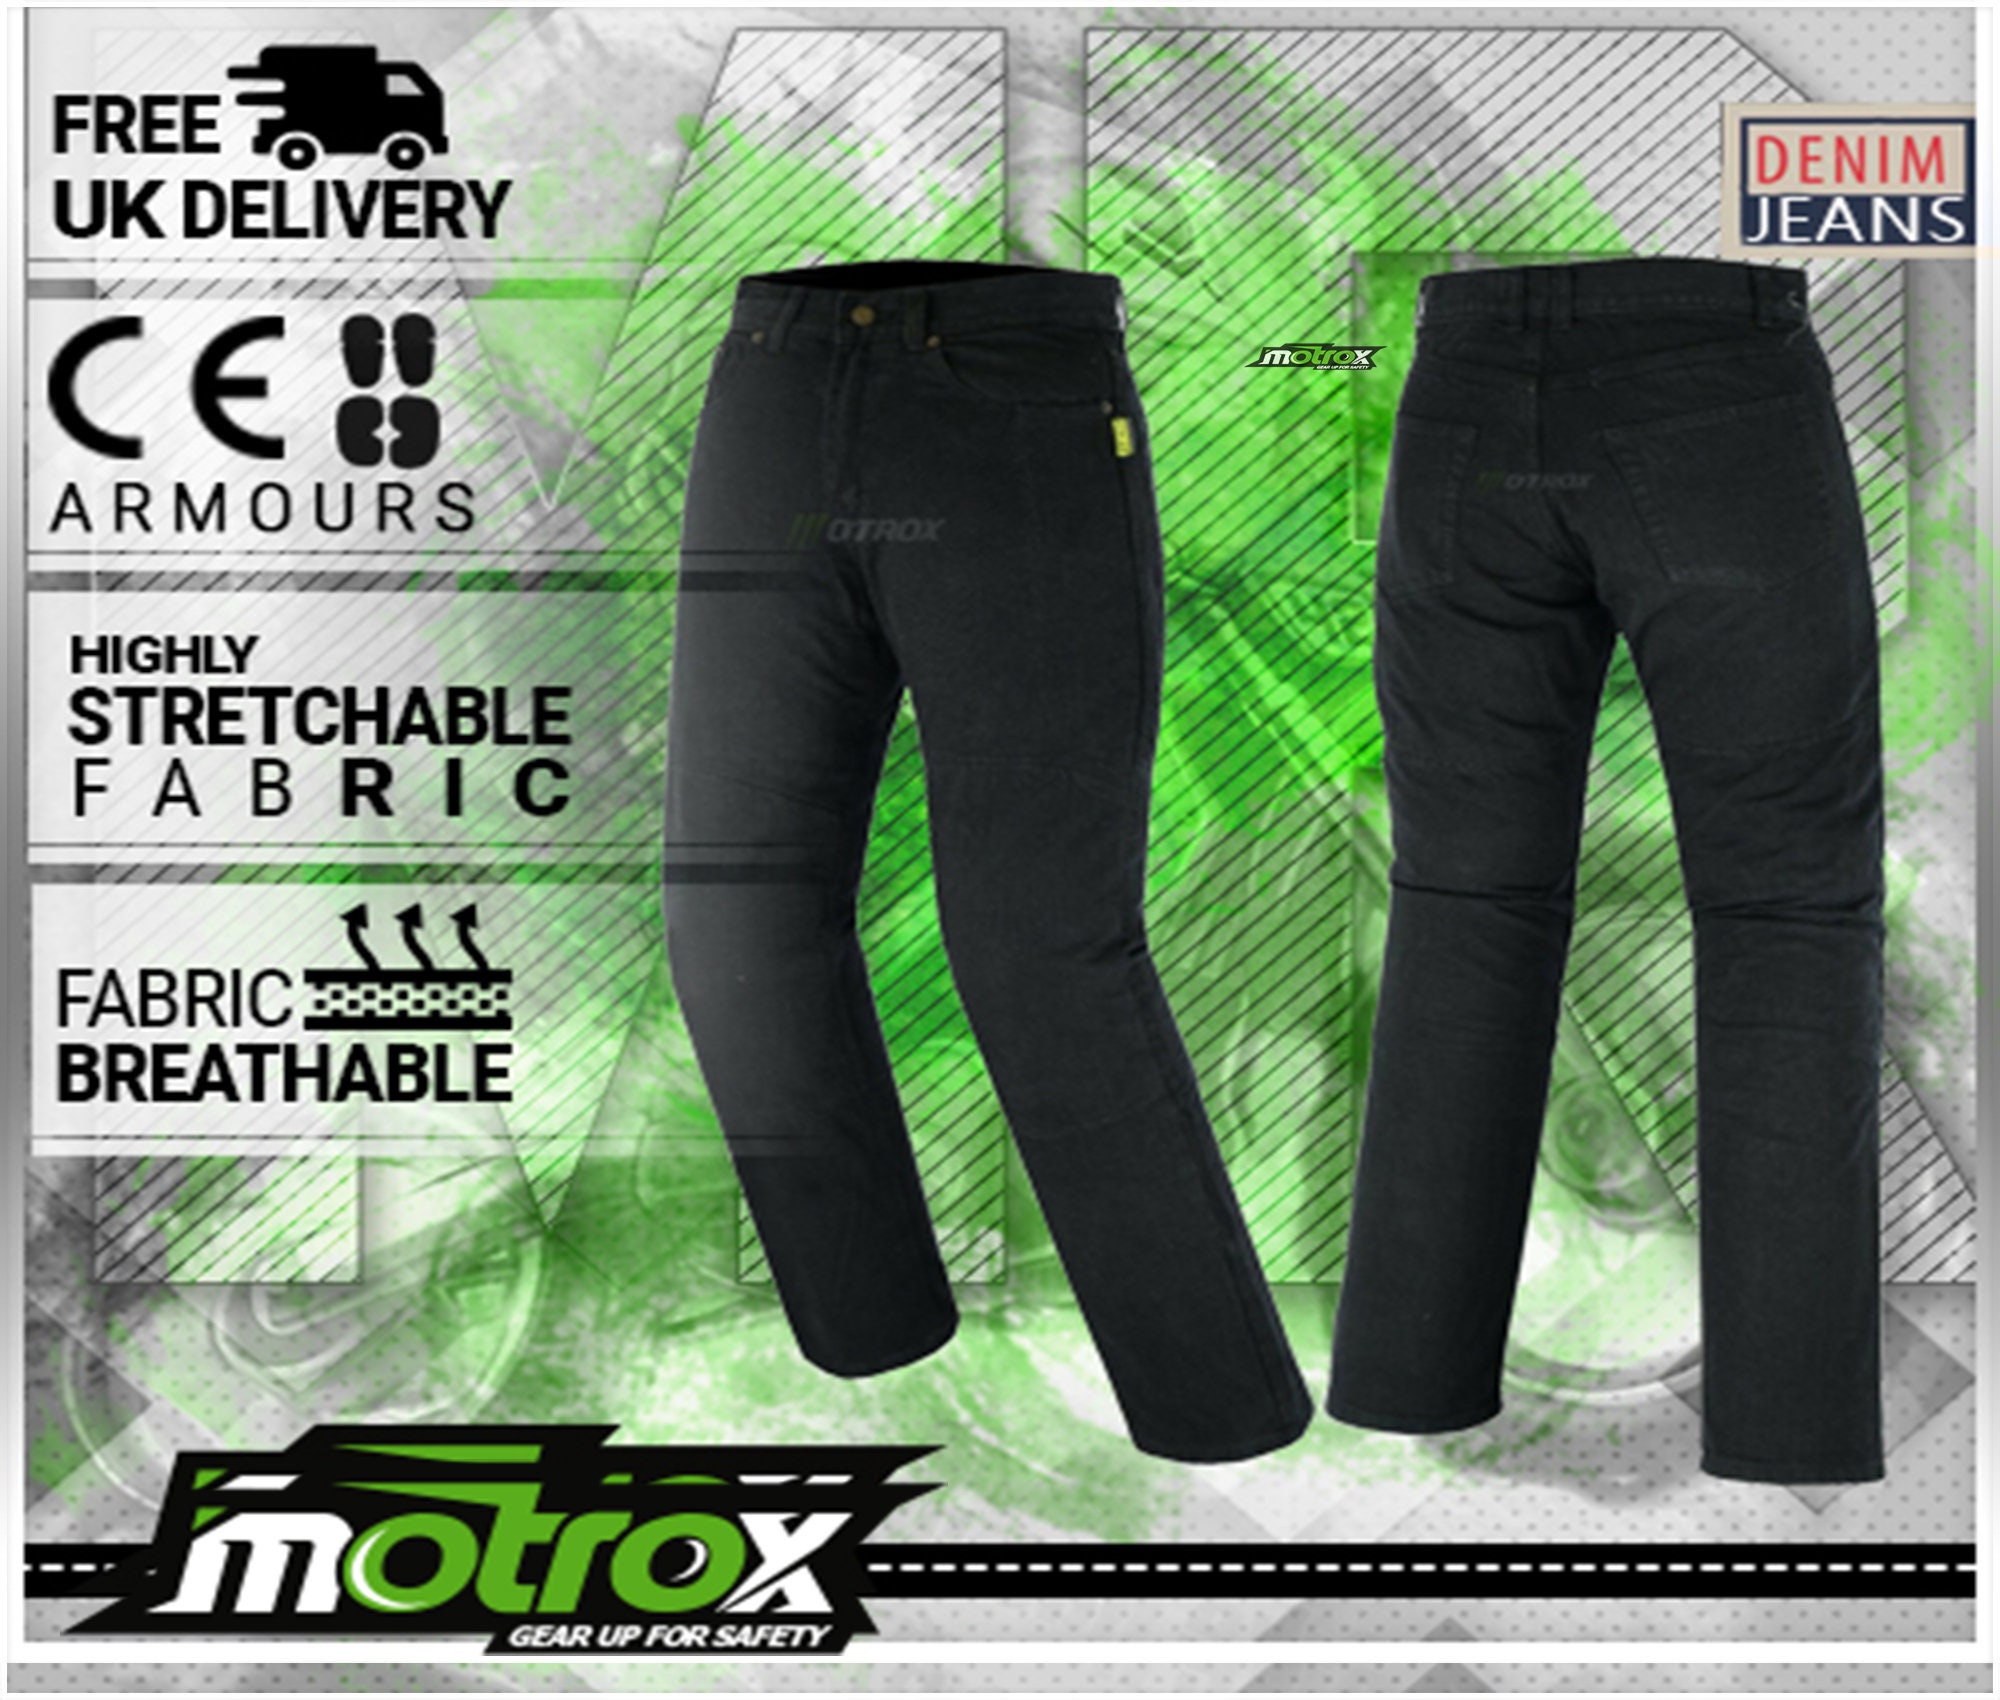 Motorbike Motorcycle Jeans Trousers Lined With KEVLAR CE Armoured 